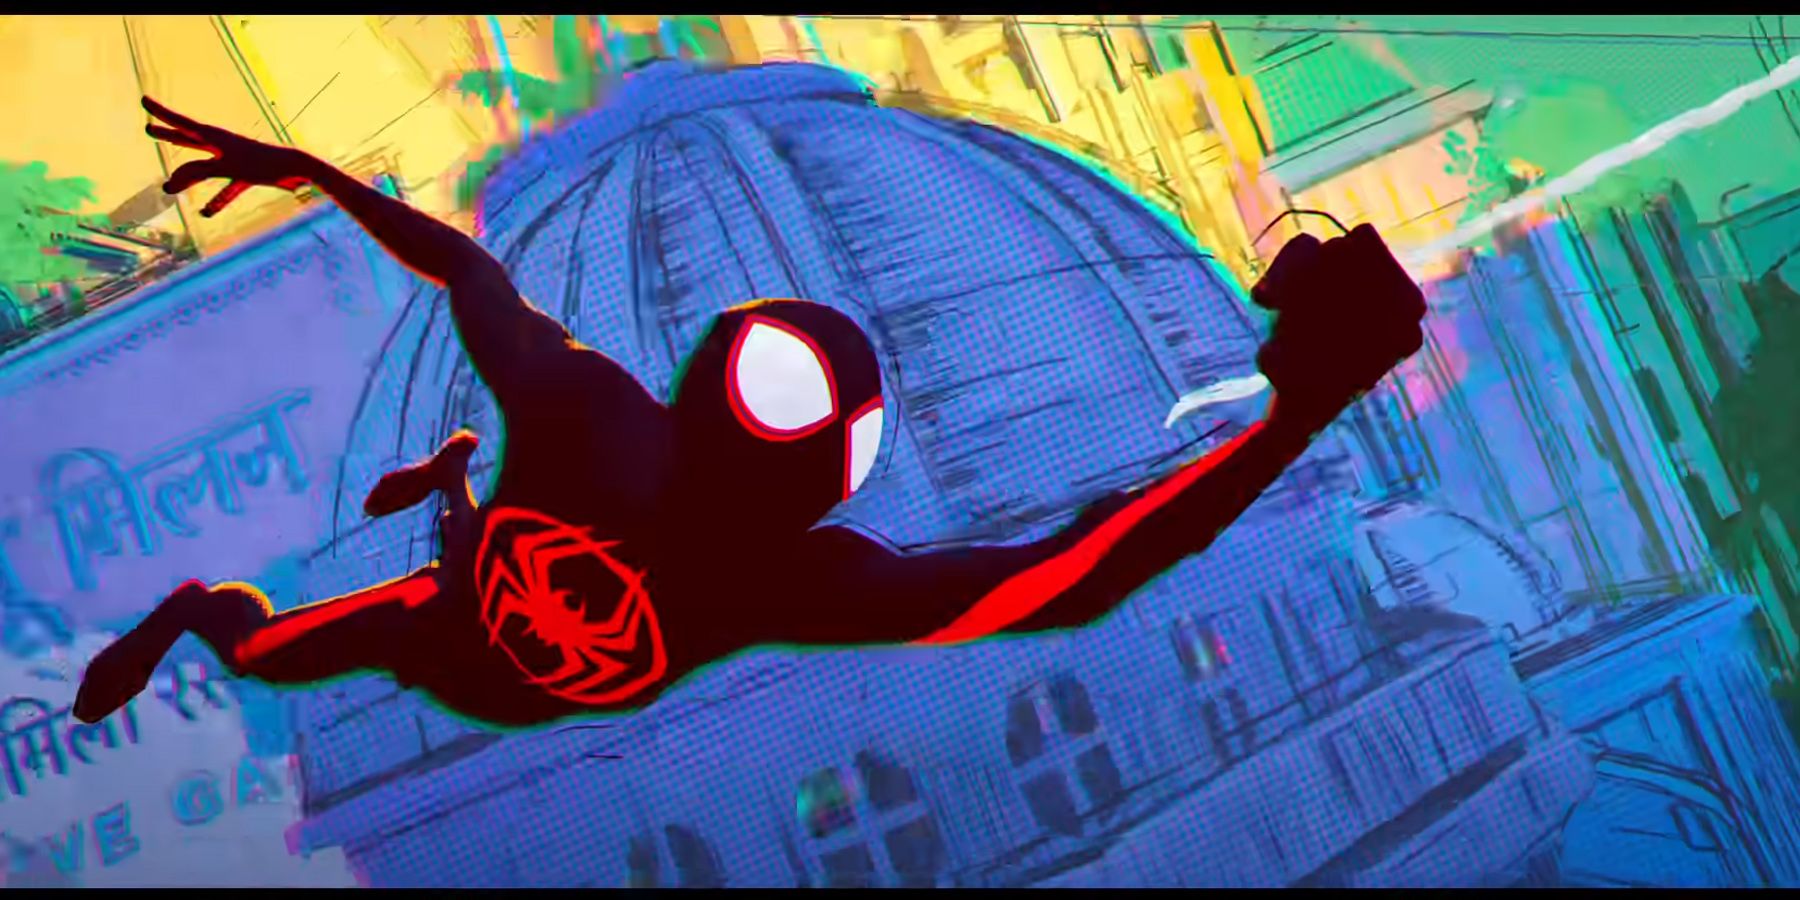 Miles Morales donning a new costume